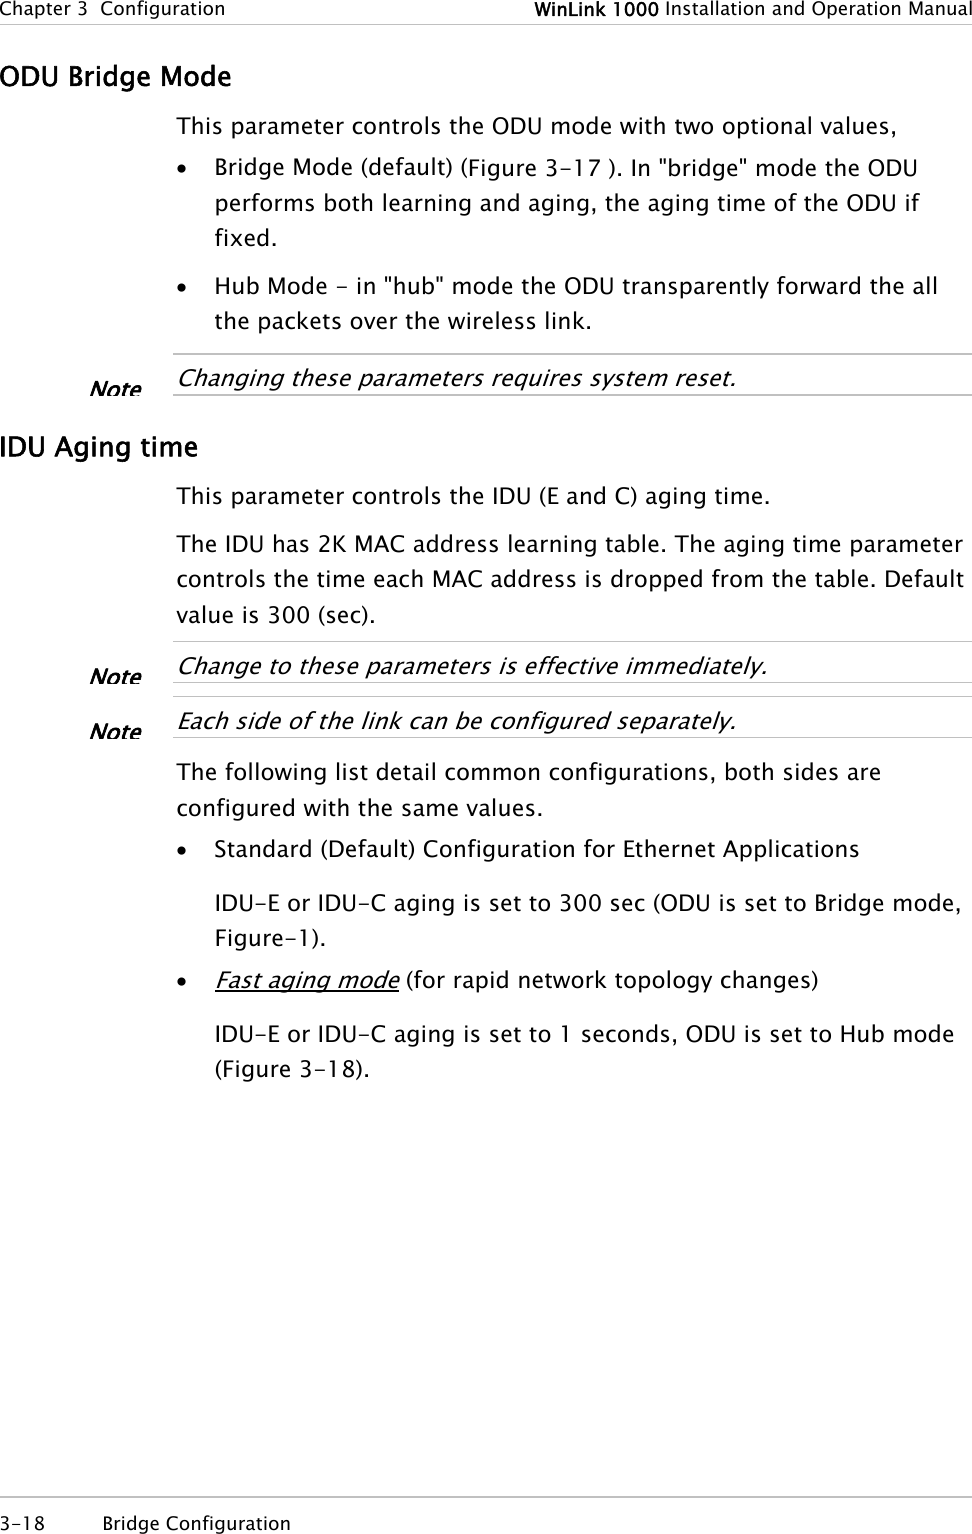 Chapter 3  Configuration  WinLink 1000 Installation and Operation Manual ODU Bridge Mode This parameter controls the ODU mode with two optional values,  • Bridge Mode (default) (Figure 3-17 ). In &quot;bridge&quot; mode the ODU performs both learning and aging, the aging time of the ODU if fixed. • Hub Mode - in &quot;hub&quot; mode the ODU transparently forward the all the packets over the wireless link.   Changing these parameters requires system reset. Note IDU Aging time This parameter controls the IDU (E and C) aging time.  The IDU has 2K MAC address learning table. The aging time parameter controls the time each MAC address is dropped from the table. Default value is 300 (sec).   Change to these parameters is effective immediately. Note  Each side of the link can be configured separately. Note The following list detail common configurations, both sides are configured with the same values. • Standard (Default) Configuration for Ethernet Applications IDU-E or IDU-C aging is set to 300 sec (ODU is set to Bridge mode, Figure-1). • Fast aging mode (for rapid network topology changes) IDU-E or IDU-C aging is set to 1 seconds, ODU is set to Hub mode (Figure 3-18). 3-18 Bridge Configuration  